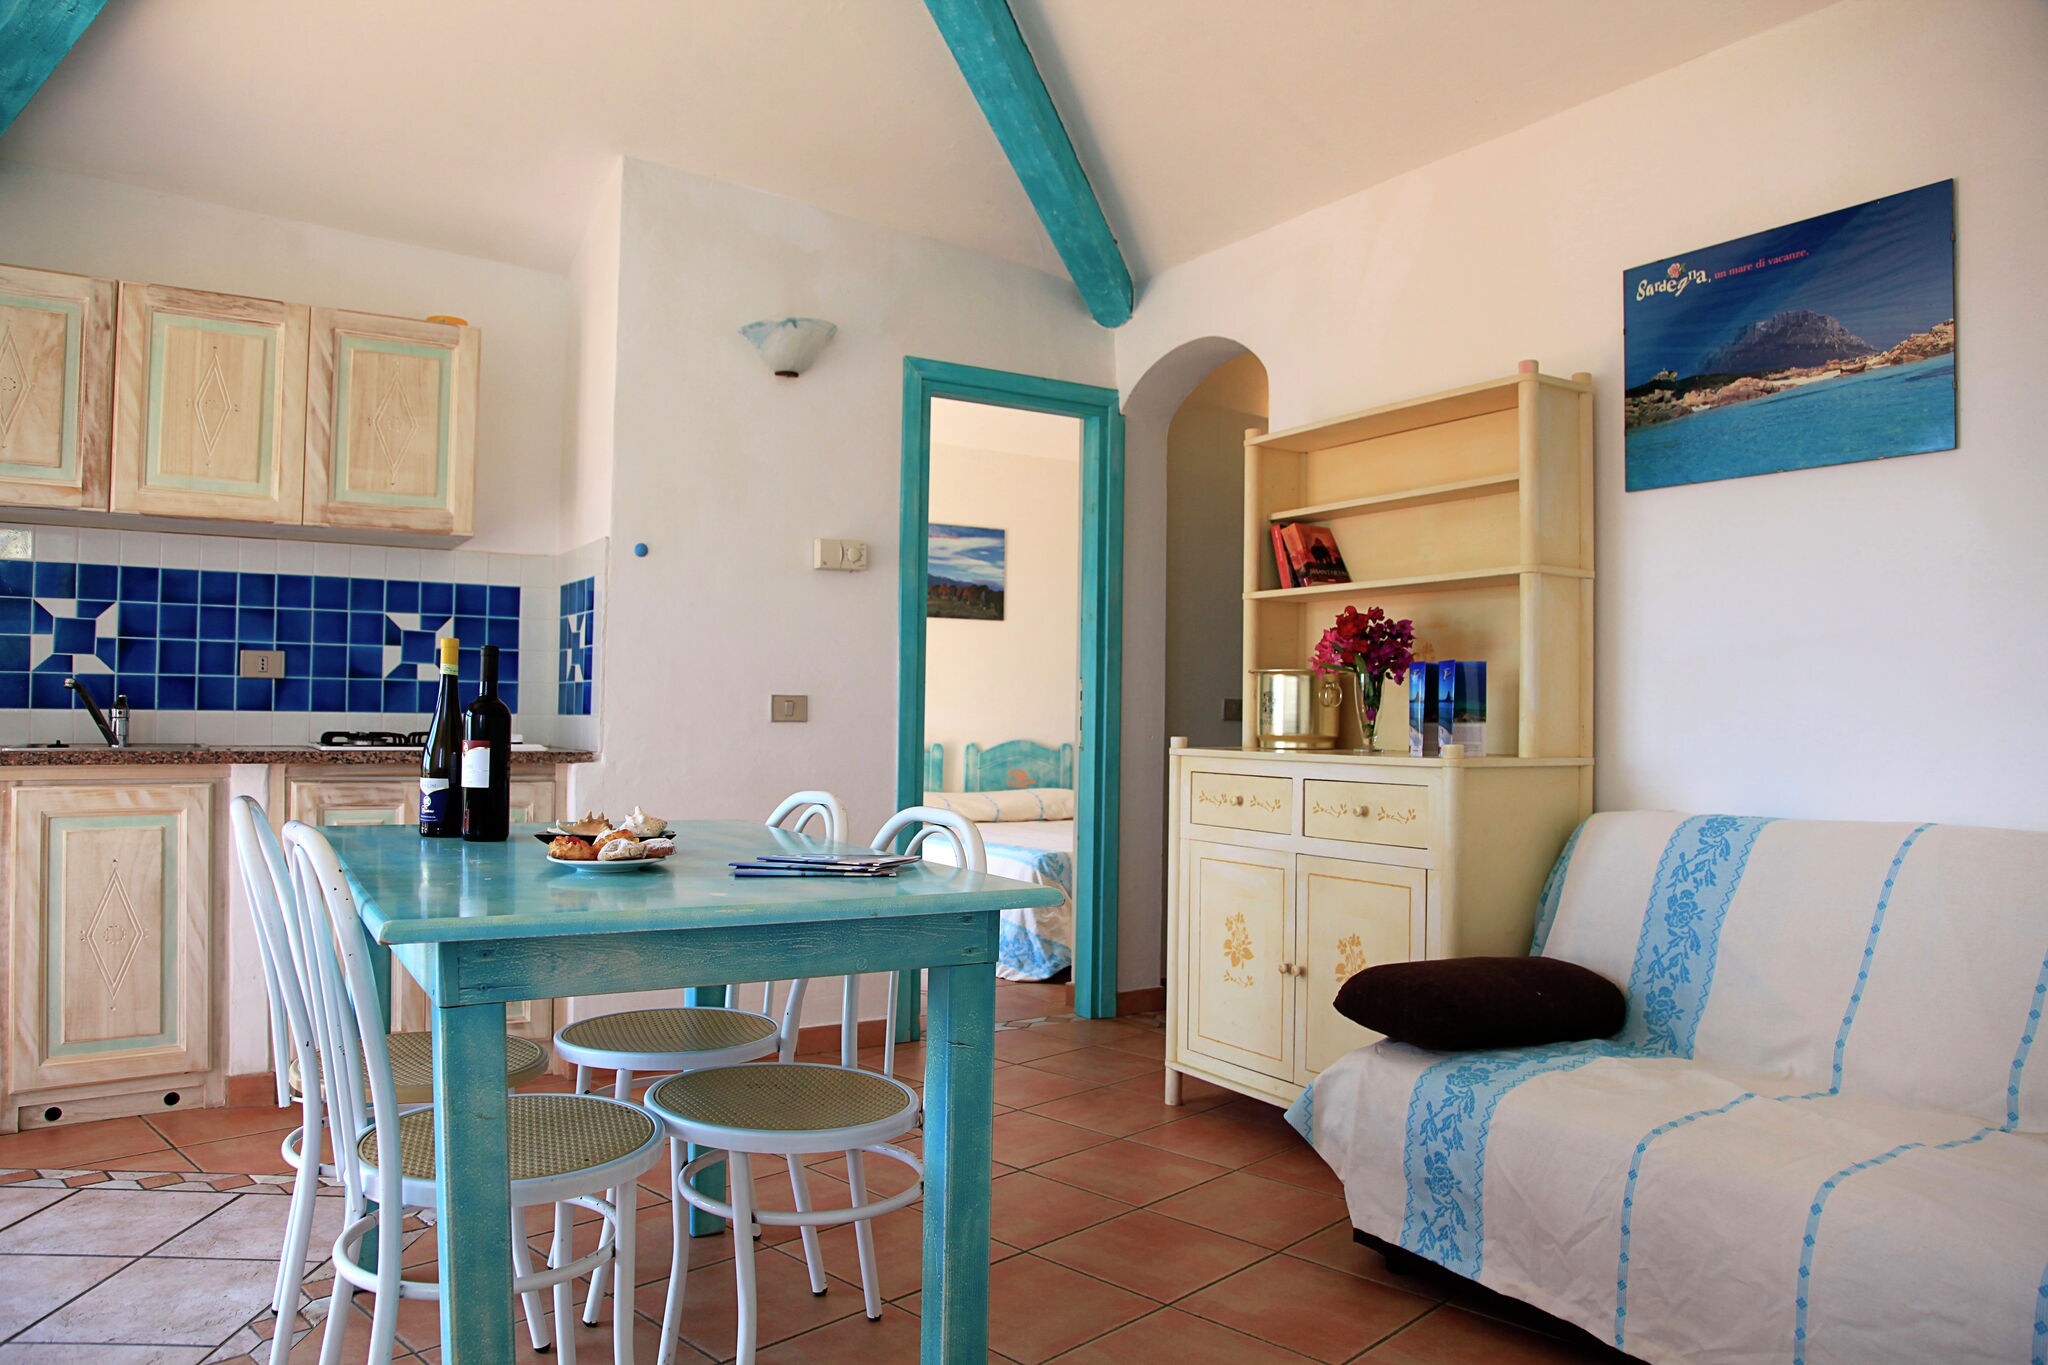 Detached villa with two bathrooms not far from the sea